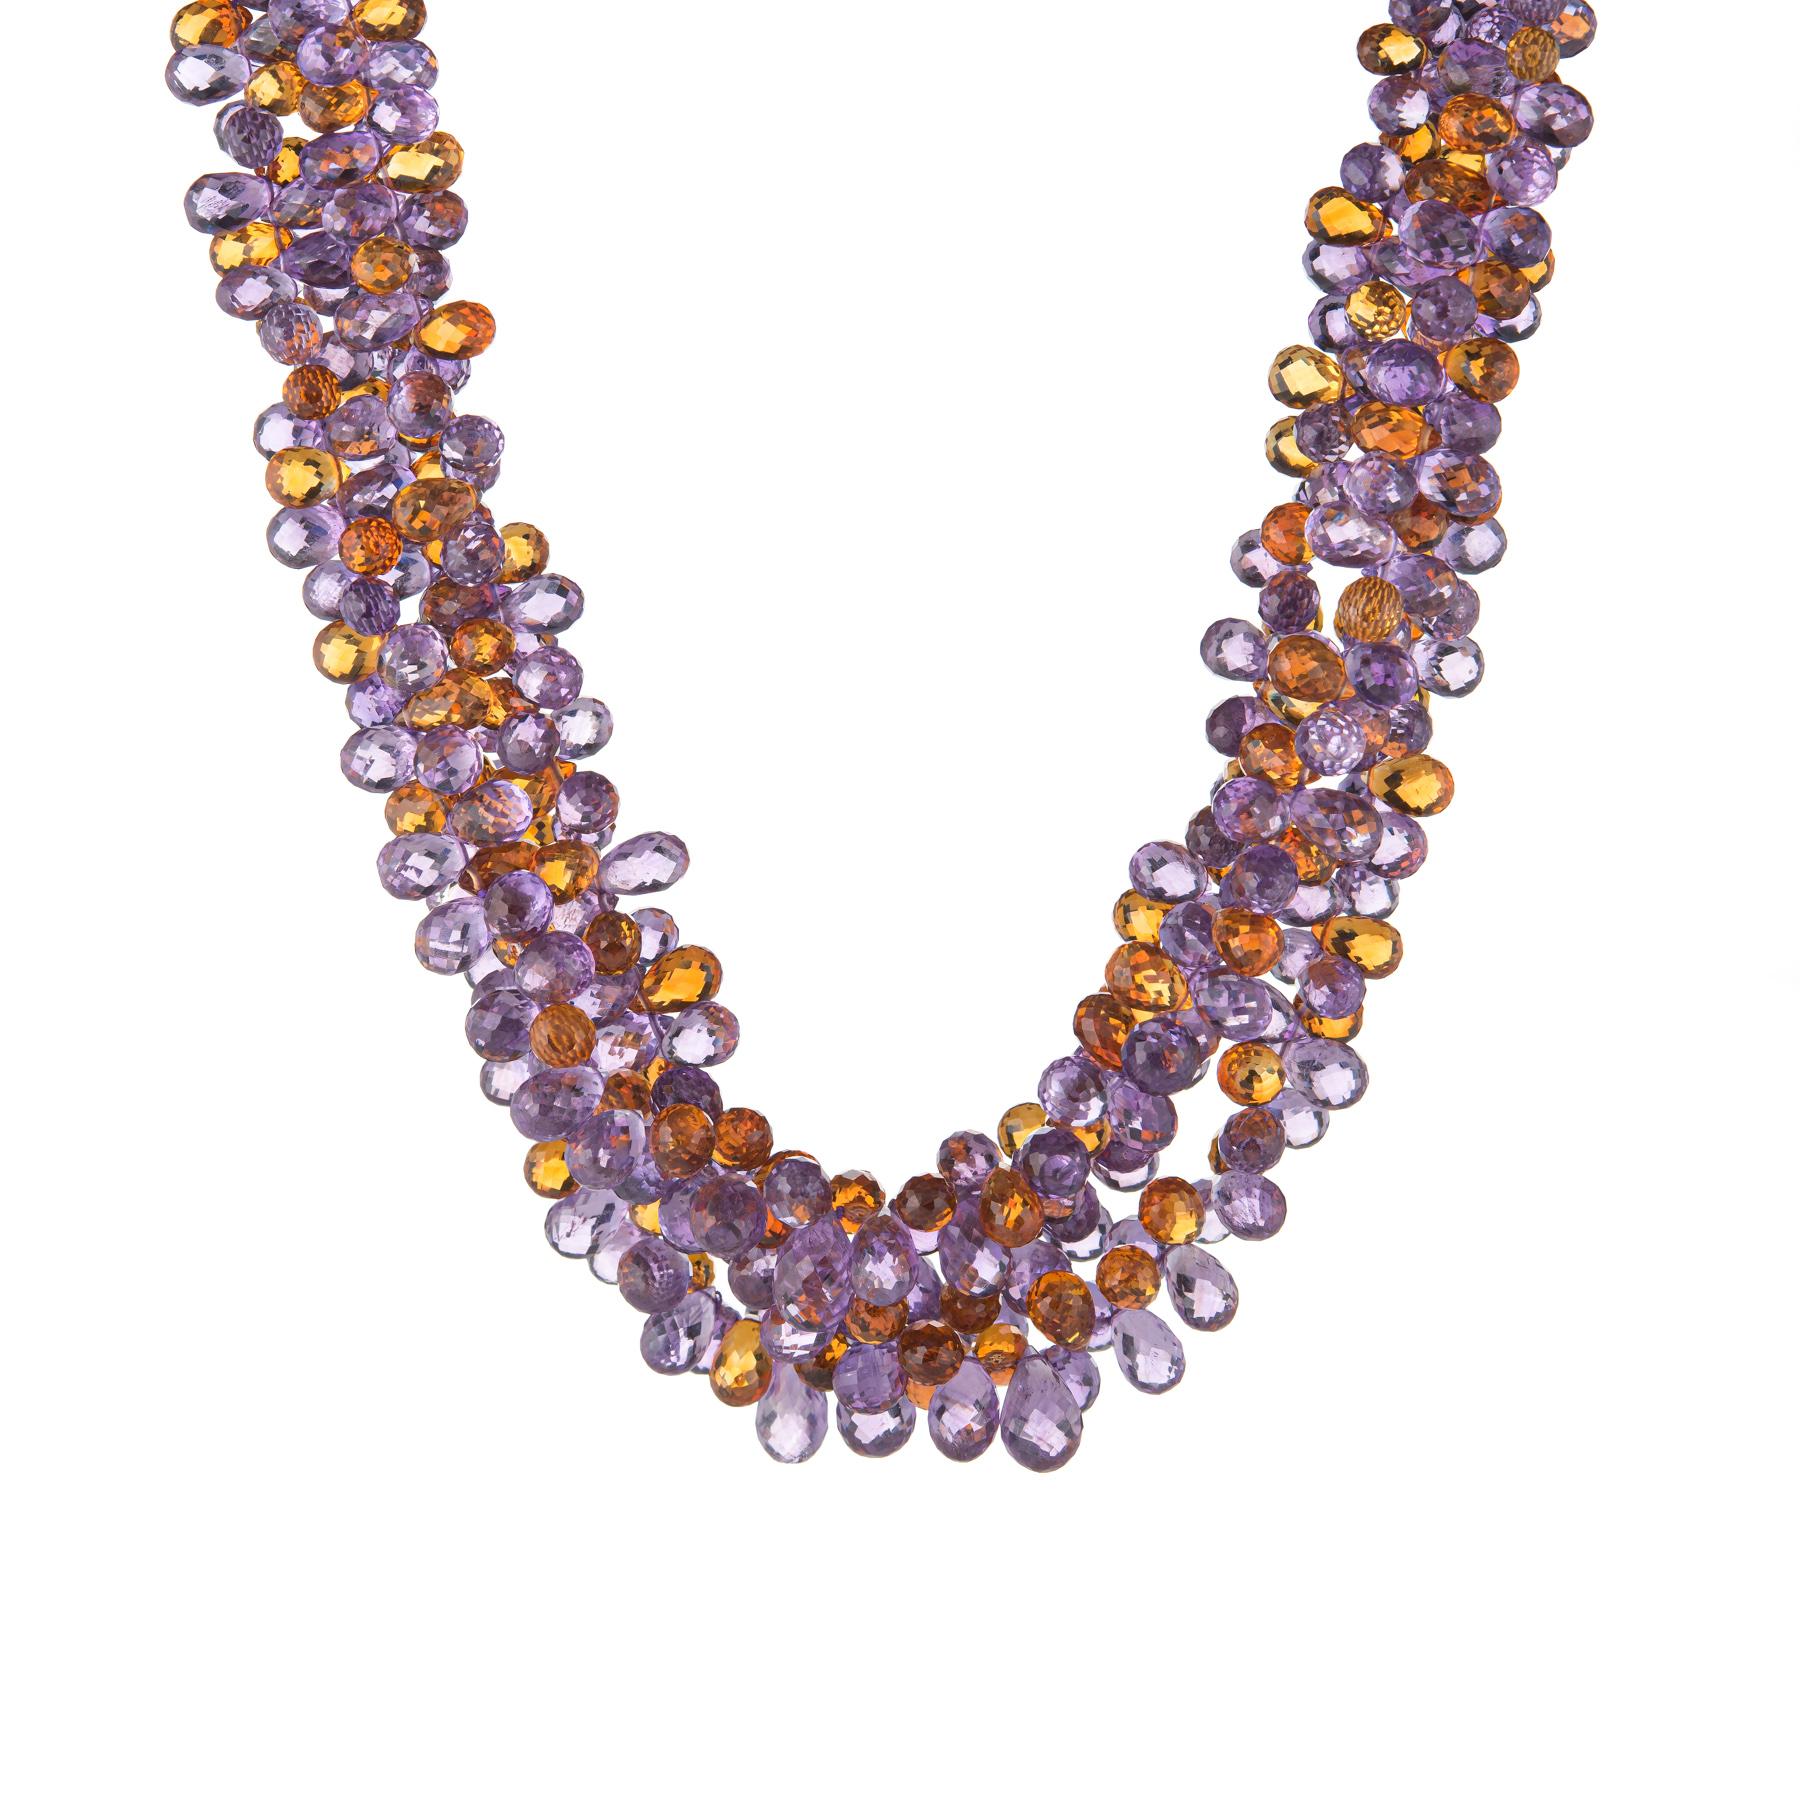 Elegant and finely detailed Buccellati torsade necklace, finished with a 18 karat yellow gold clasp.  

Three strands of briolette faceted citrine and amethyst measure (average) 5mm. The semi-precious gemstones are in excellent condition and free of